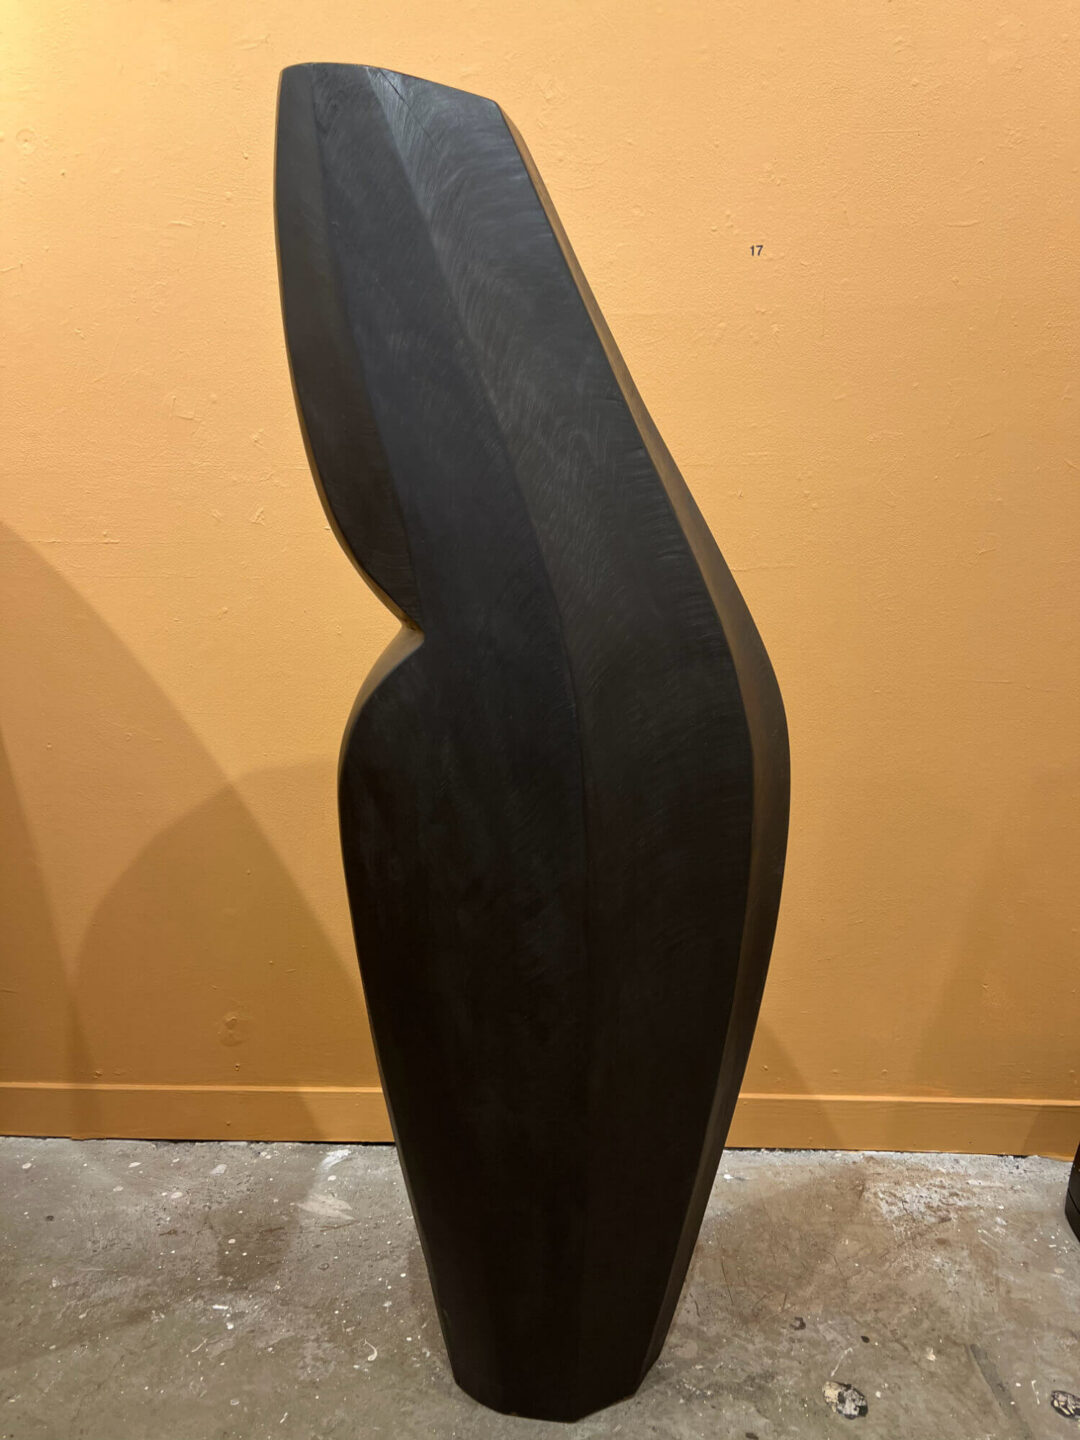 Bruce Mitchell - STANDING FIGURE - 2010 - painted redwood - 52in × 18.25in × 9in